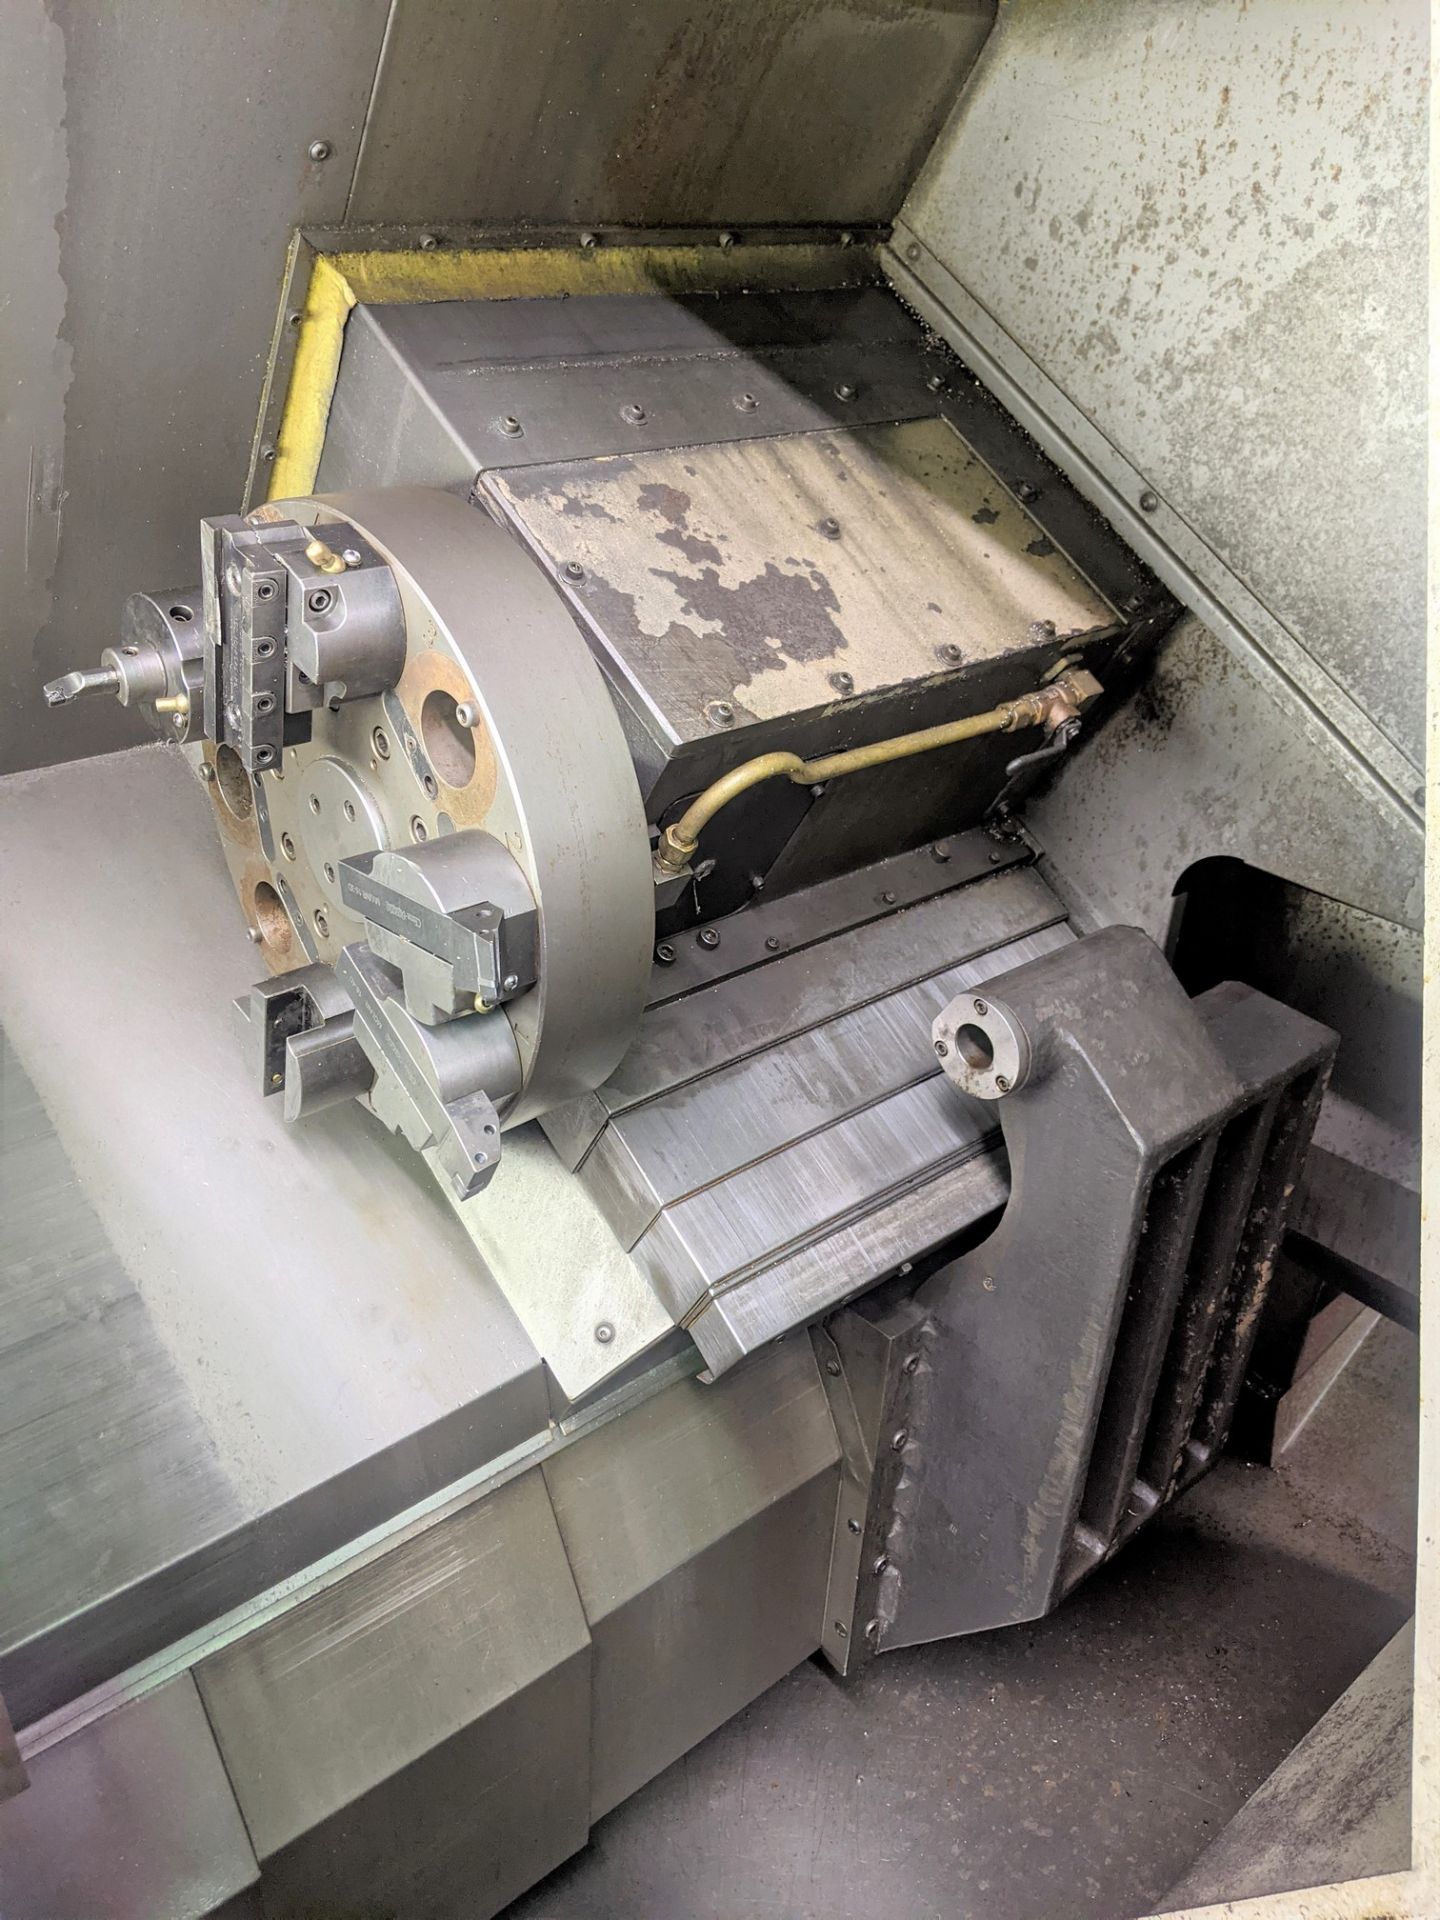 HAAS HL-2 CNC LATHE, CNC CONTROL, 8” 3-JAW CHUCK, TAILSTOCK, TOOL PRESETTER, 10-STATION TURRET, S/ - Image 5 of 12